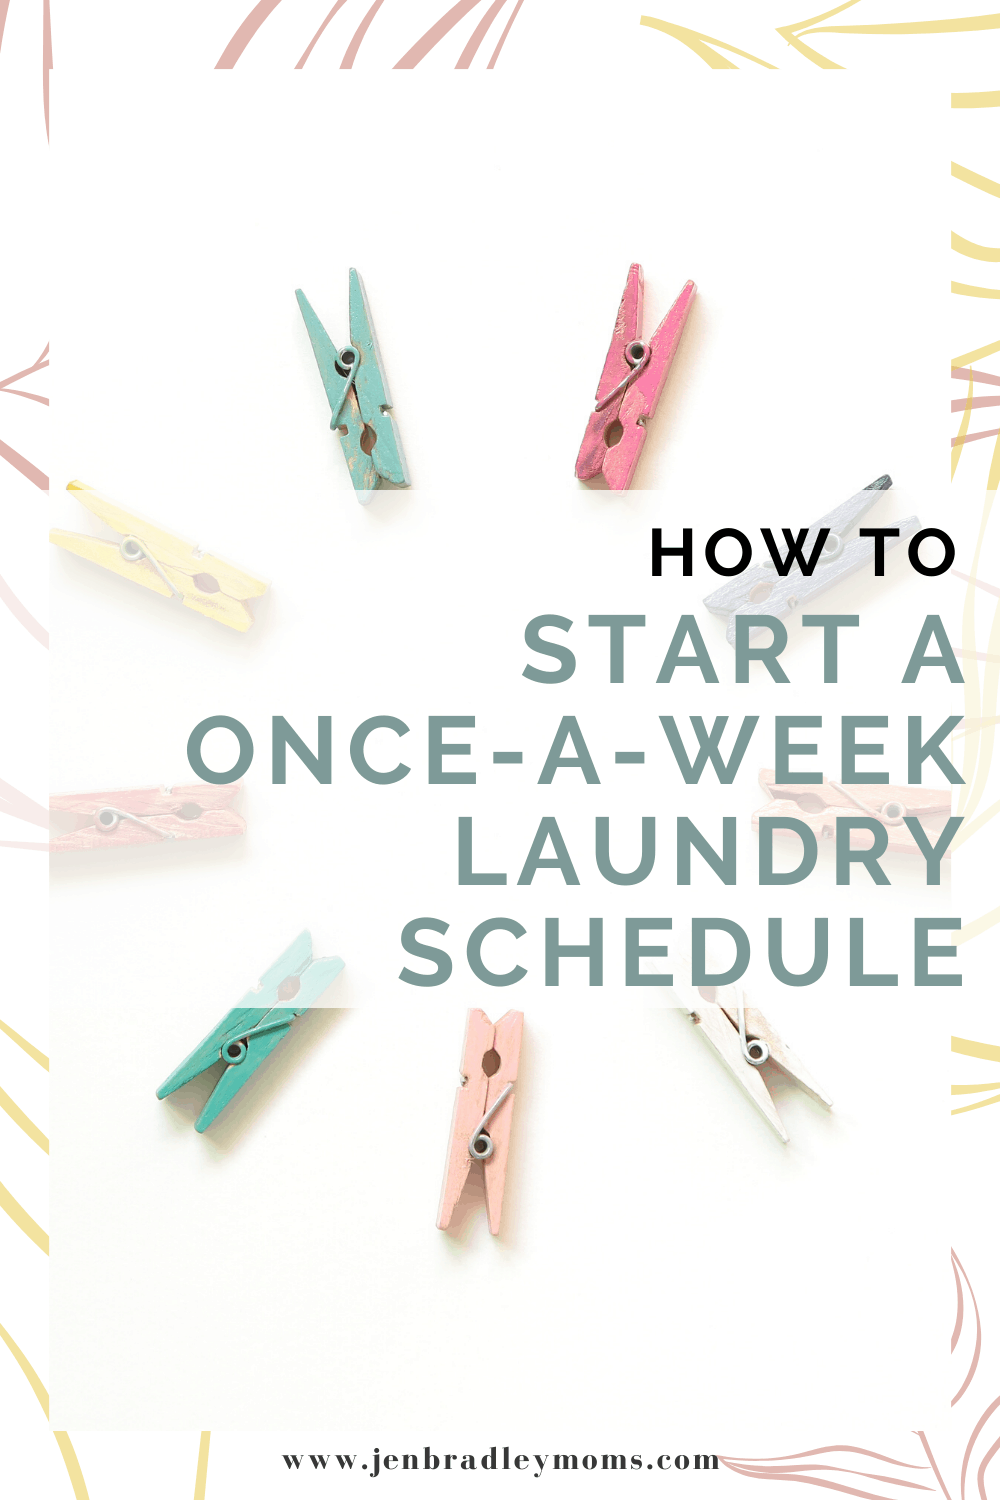 How to Make the Switch to a Once-a-Week Family Laundry Schedule